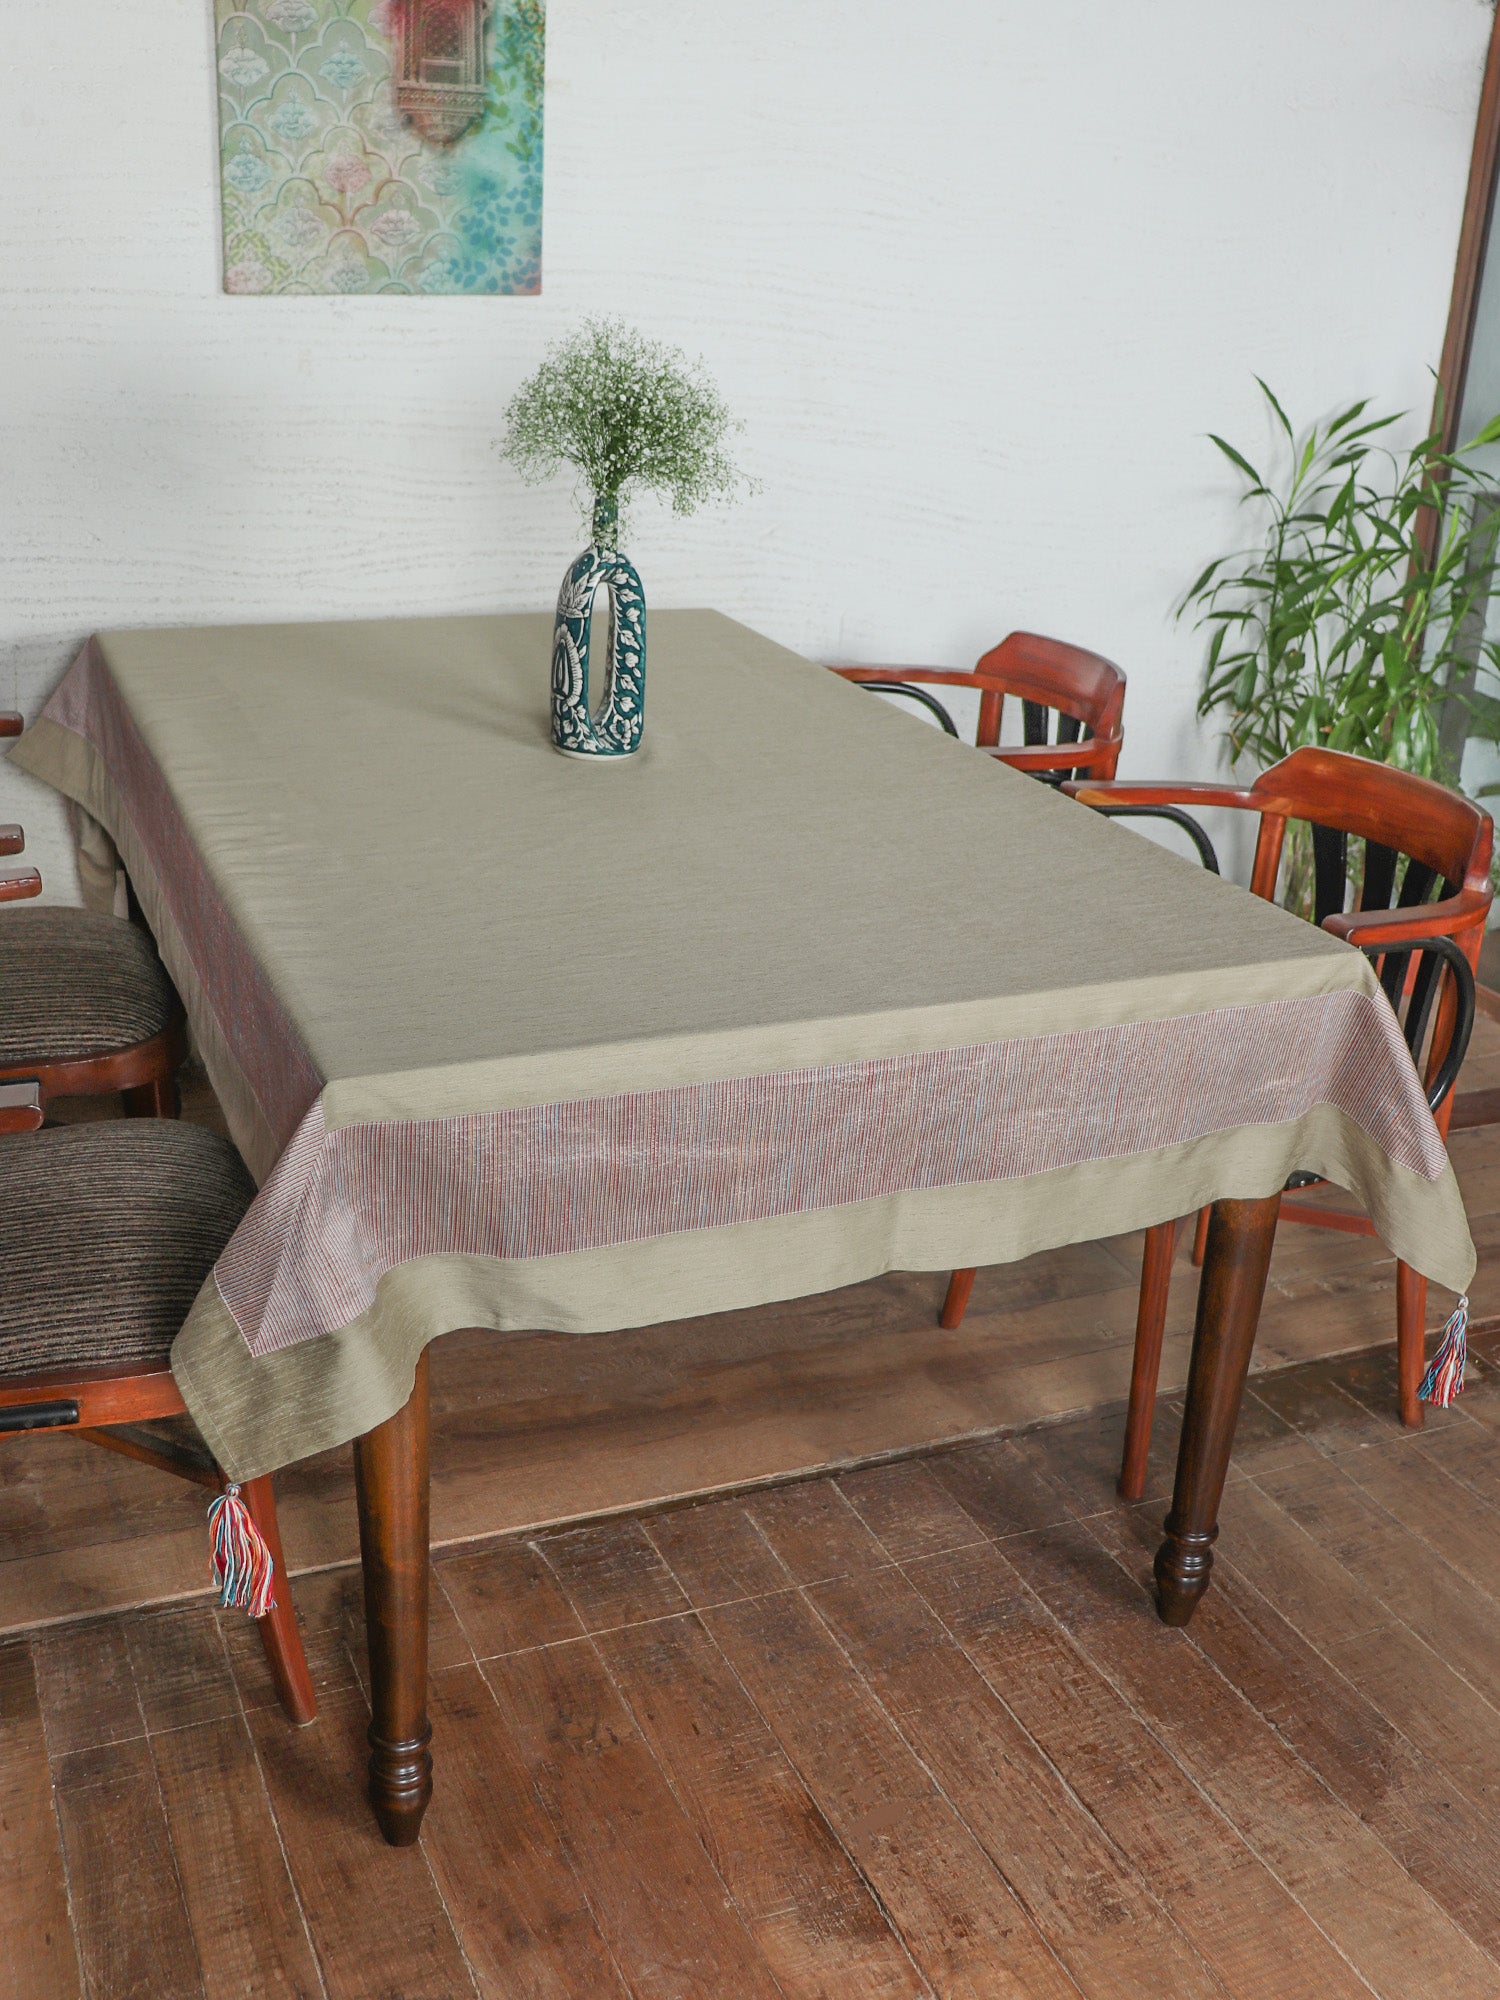 Table Cover Patchwork and Jeans Stitch Panel of Silk and Tassels Light Beige - 52in x 84in